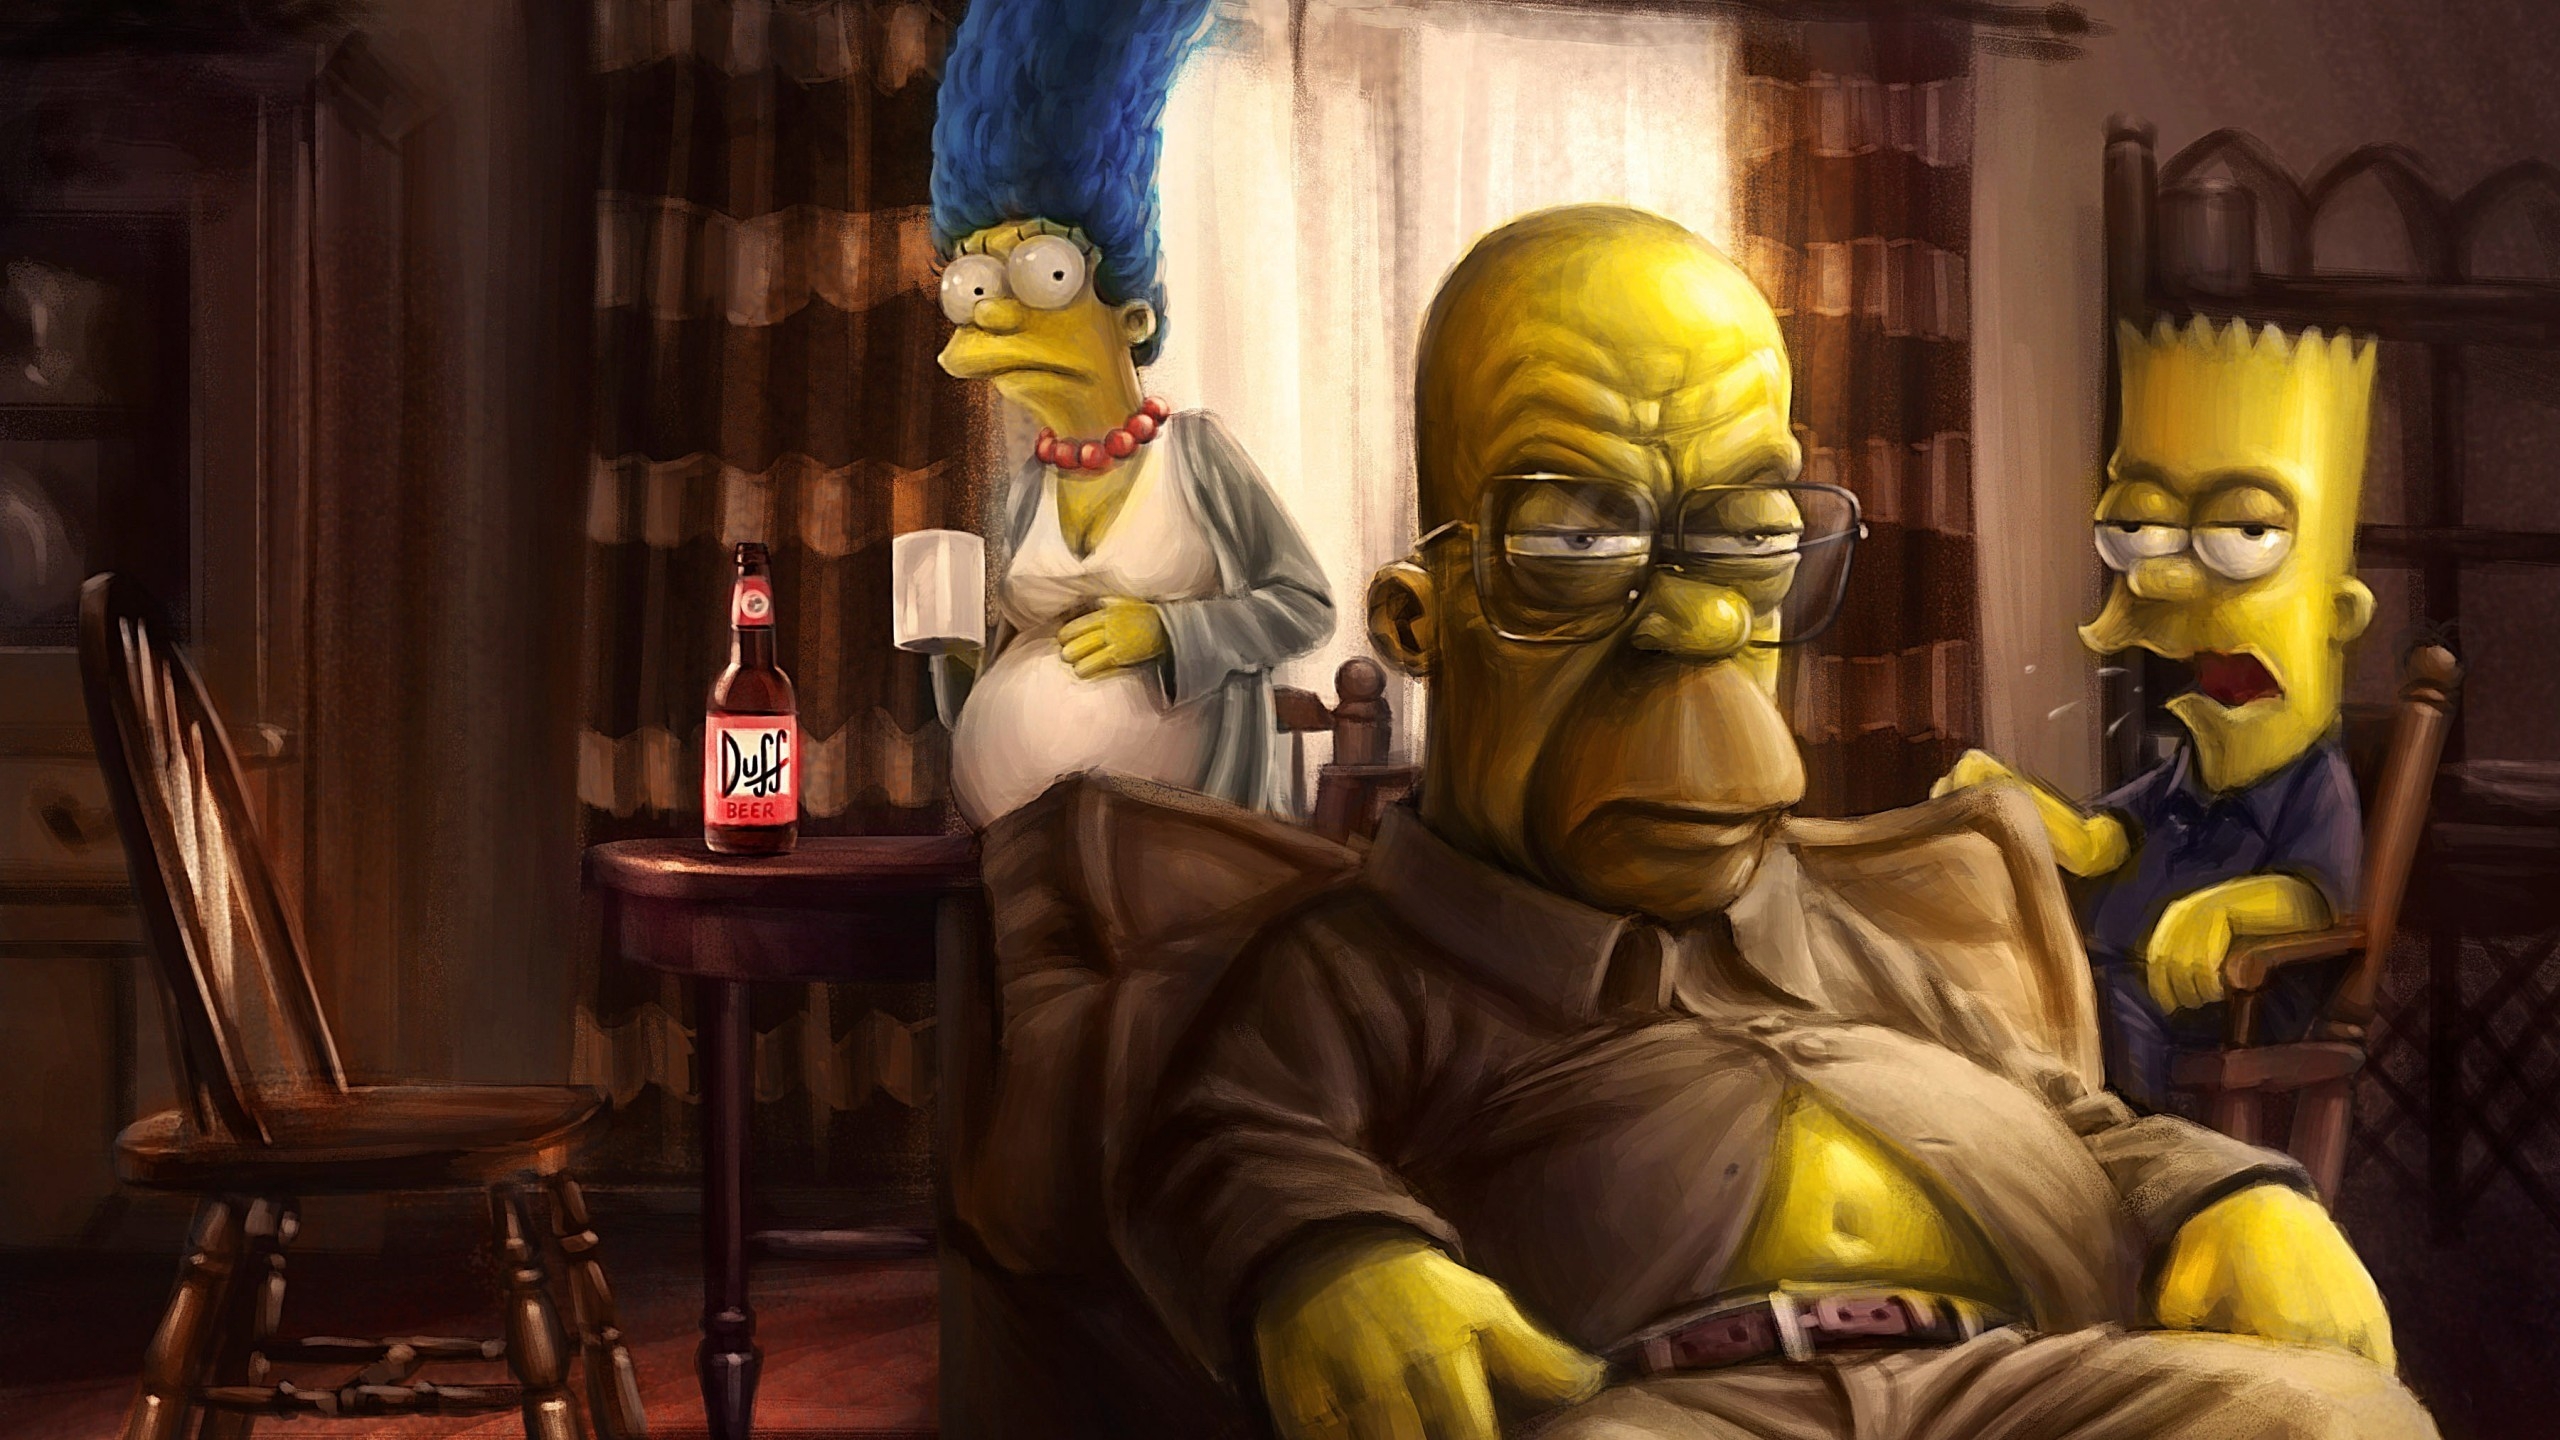 The Simpsons Breaking Bad for 2560x1440 HDTV resolution